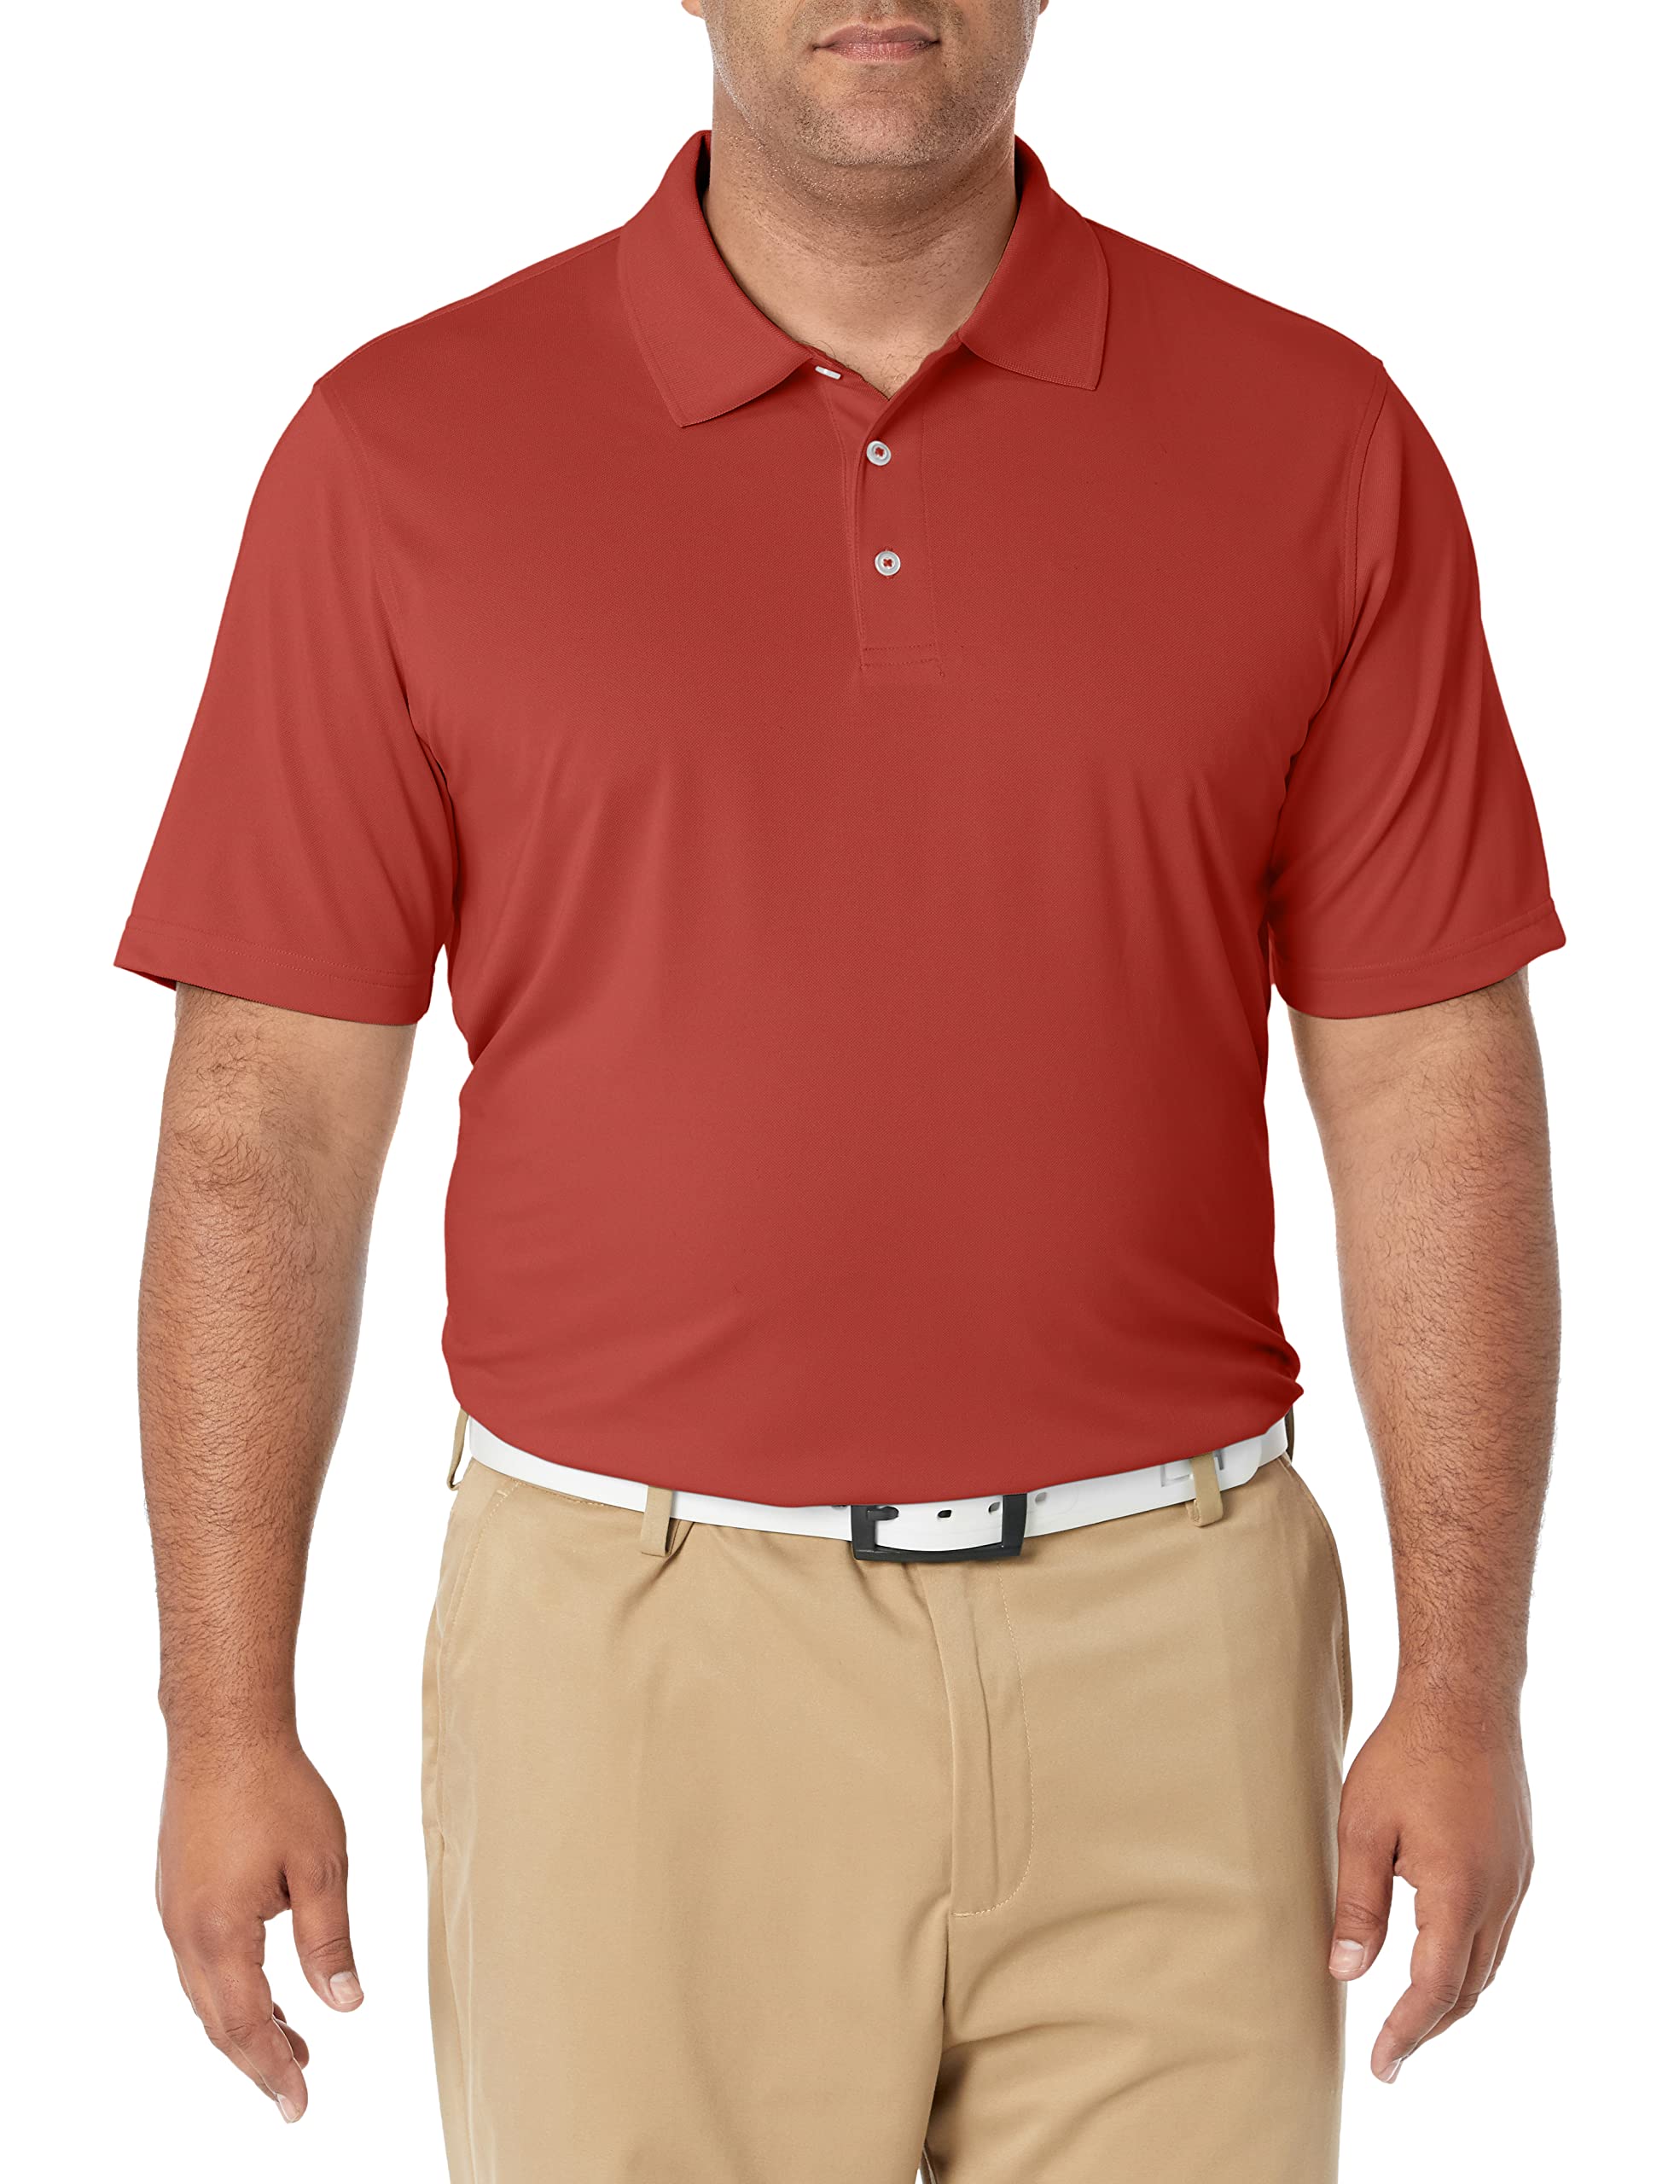 Amazon Essentials Men's Regular-Fit Quick-Dry Golf Polo Shirt (Rust, Various Sizes) from $6.40+ Free Shipping w/ Prime or on $35+